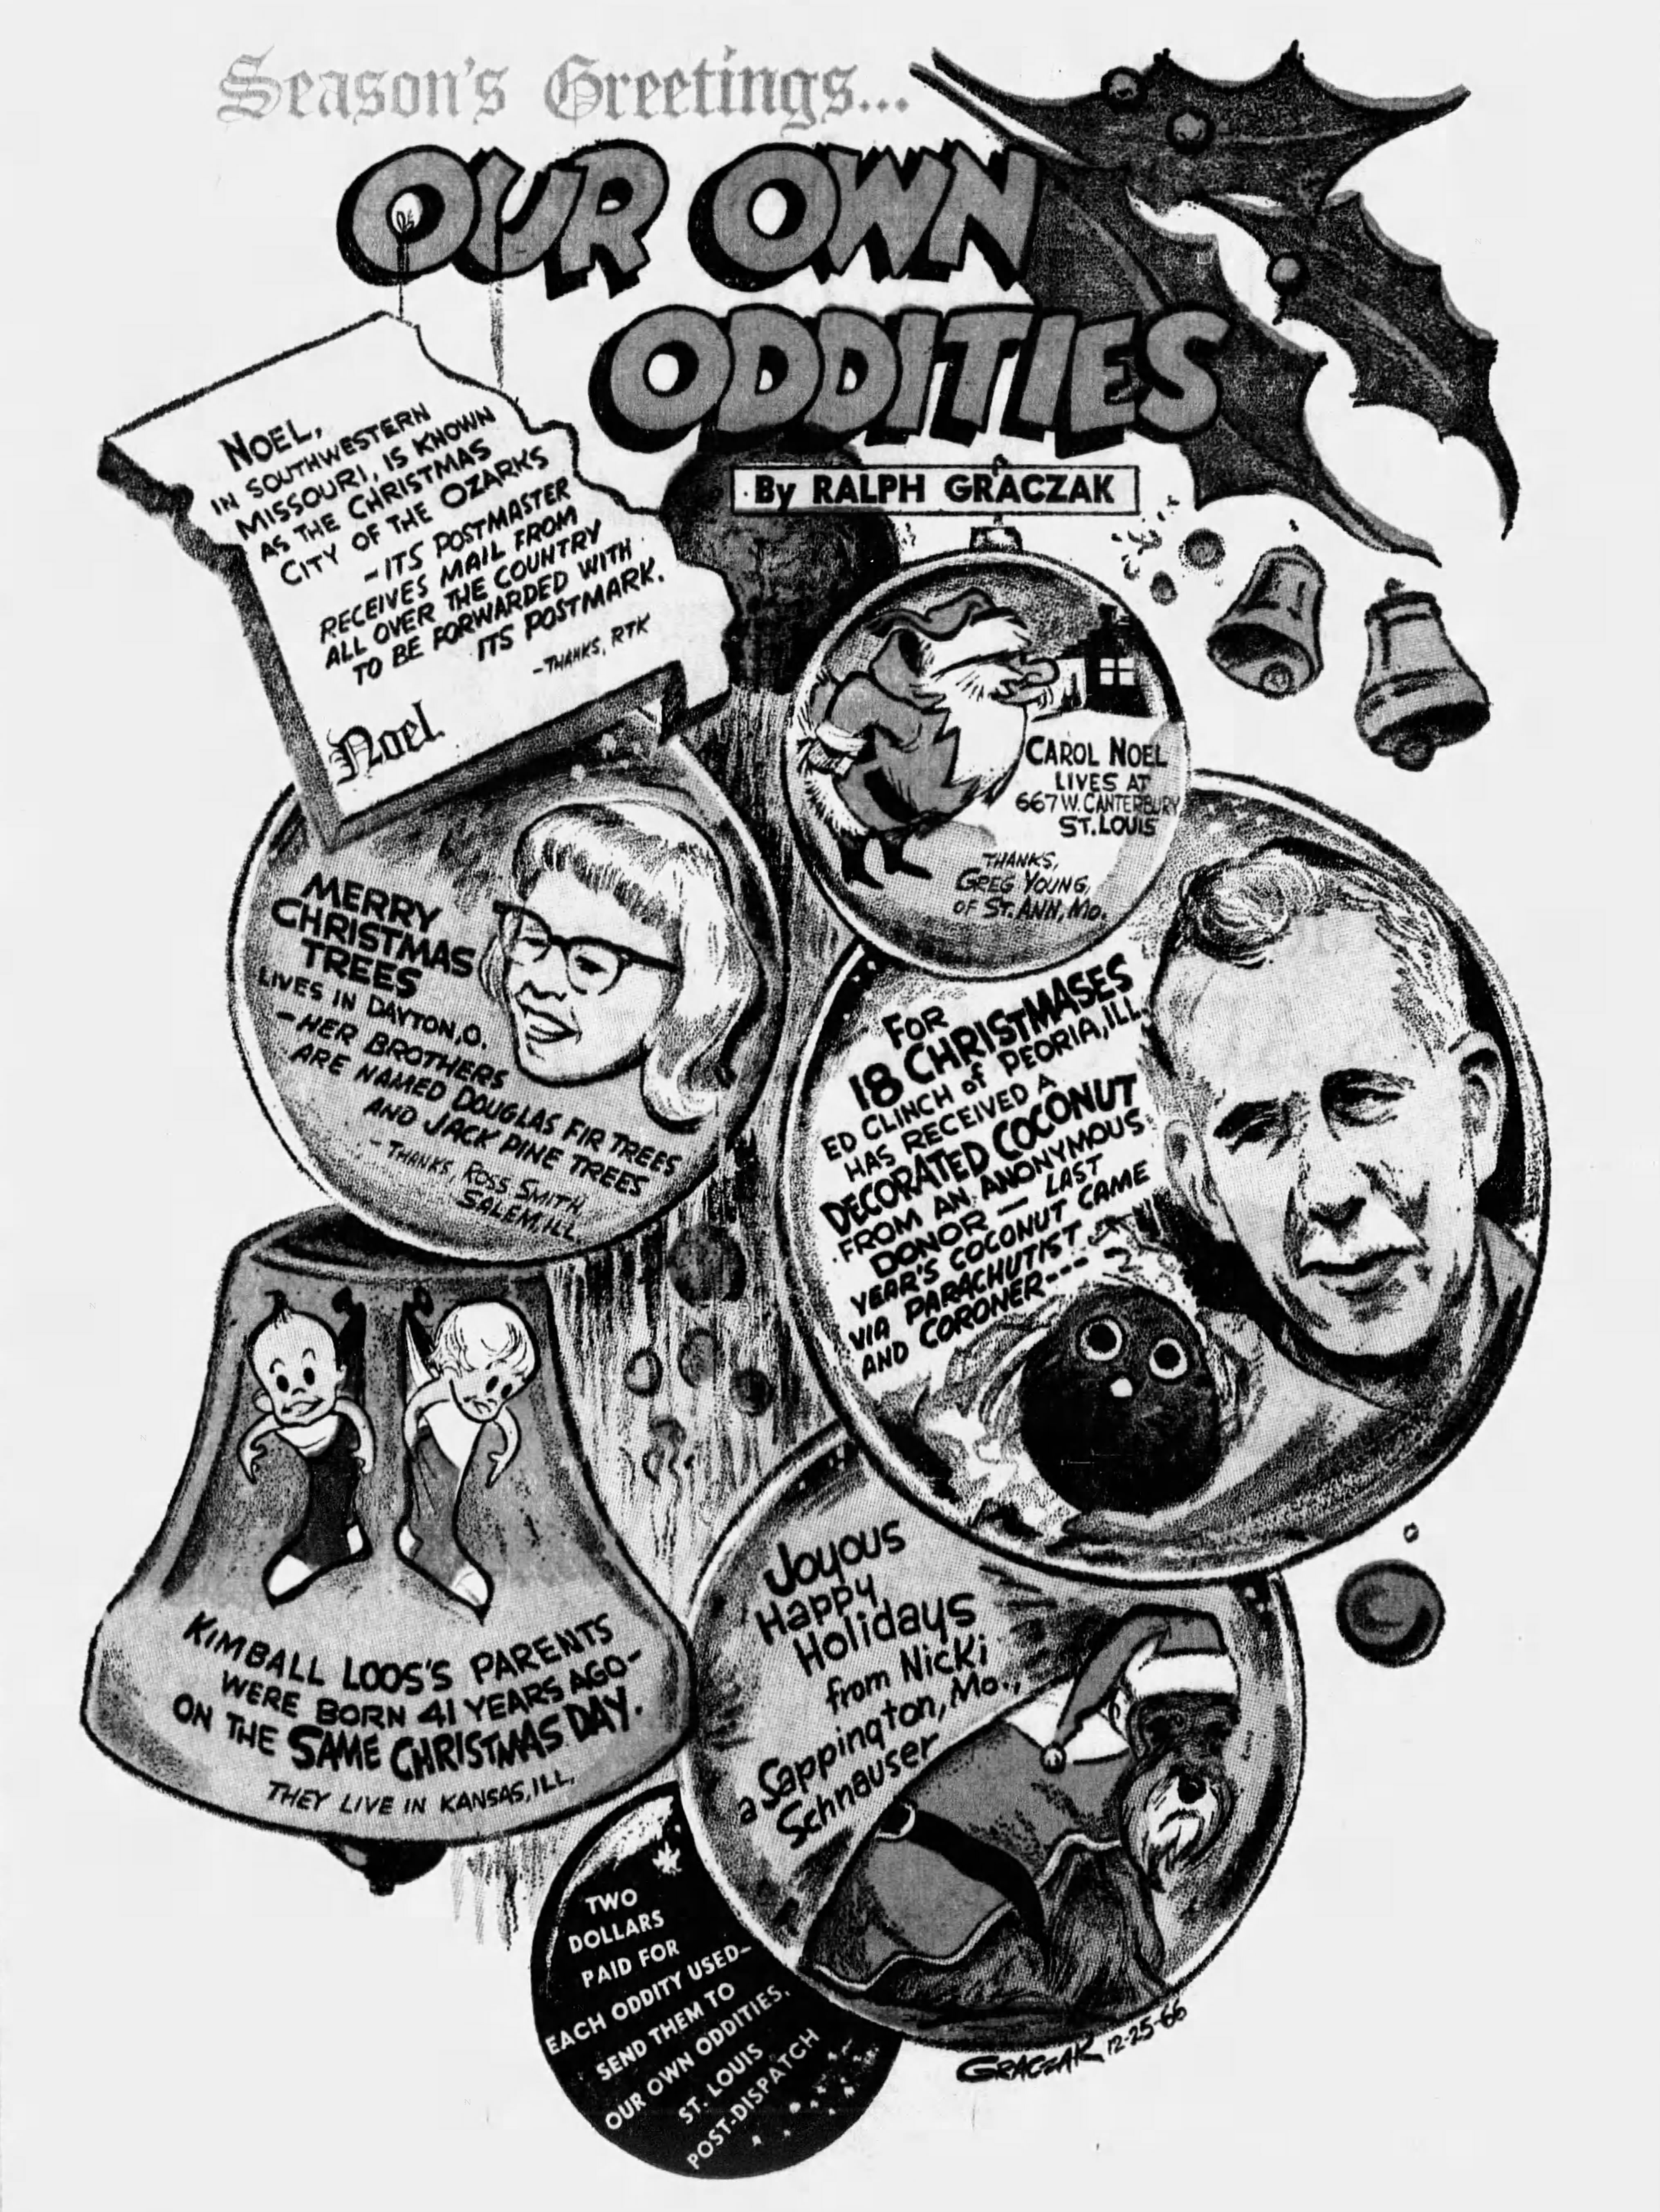 Our Own Oddities, December 25, 1966